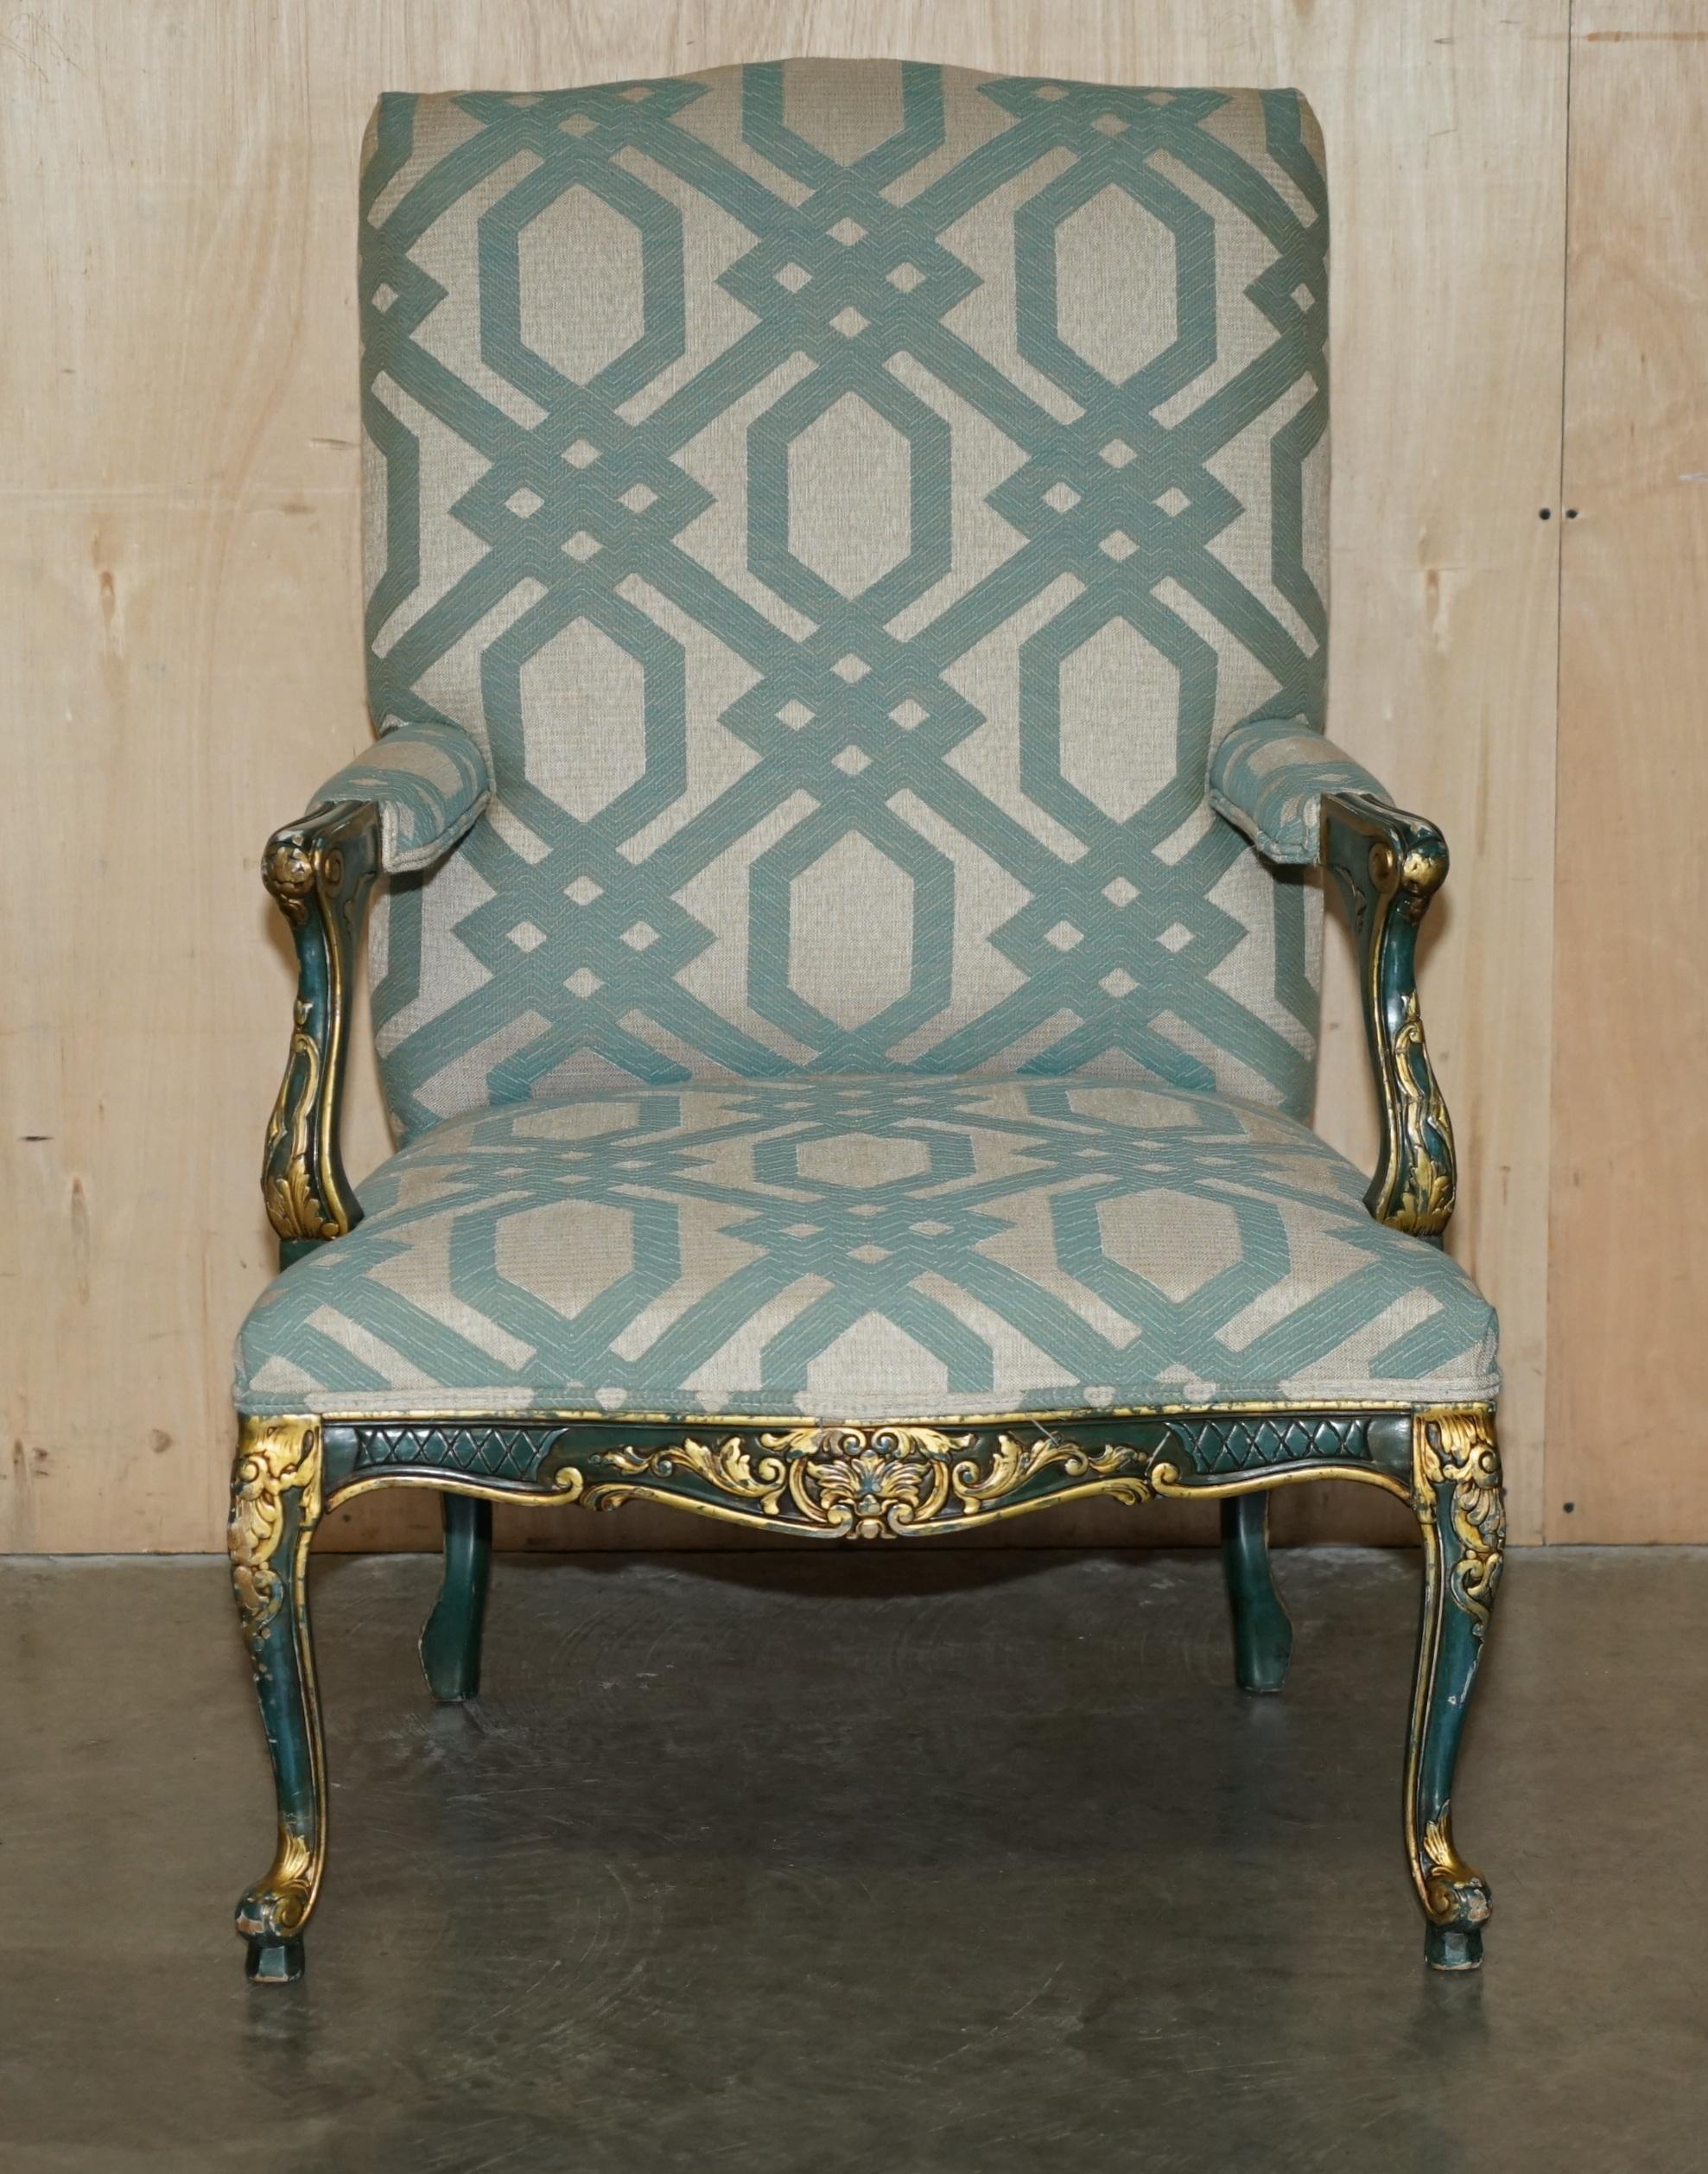 PAIR OF ViNTAGE PAINTED GREEN FRENCH FRATELLI ARMCHAIRS ORNATELY CARVED FRAMES For Sale 12